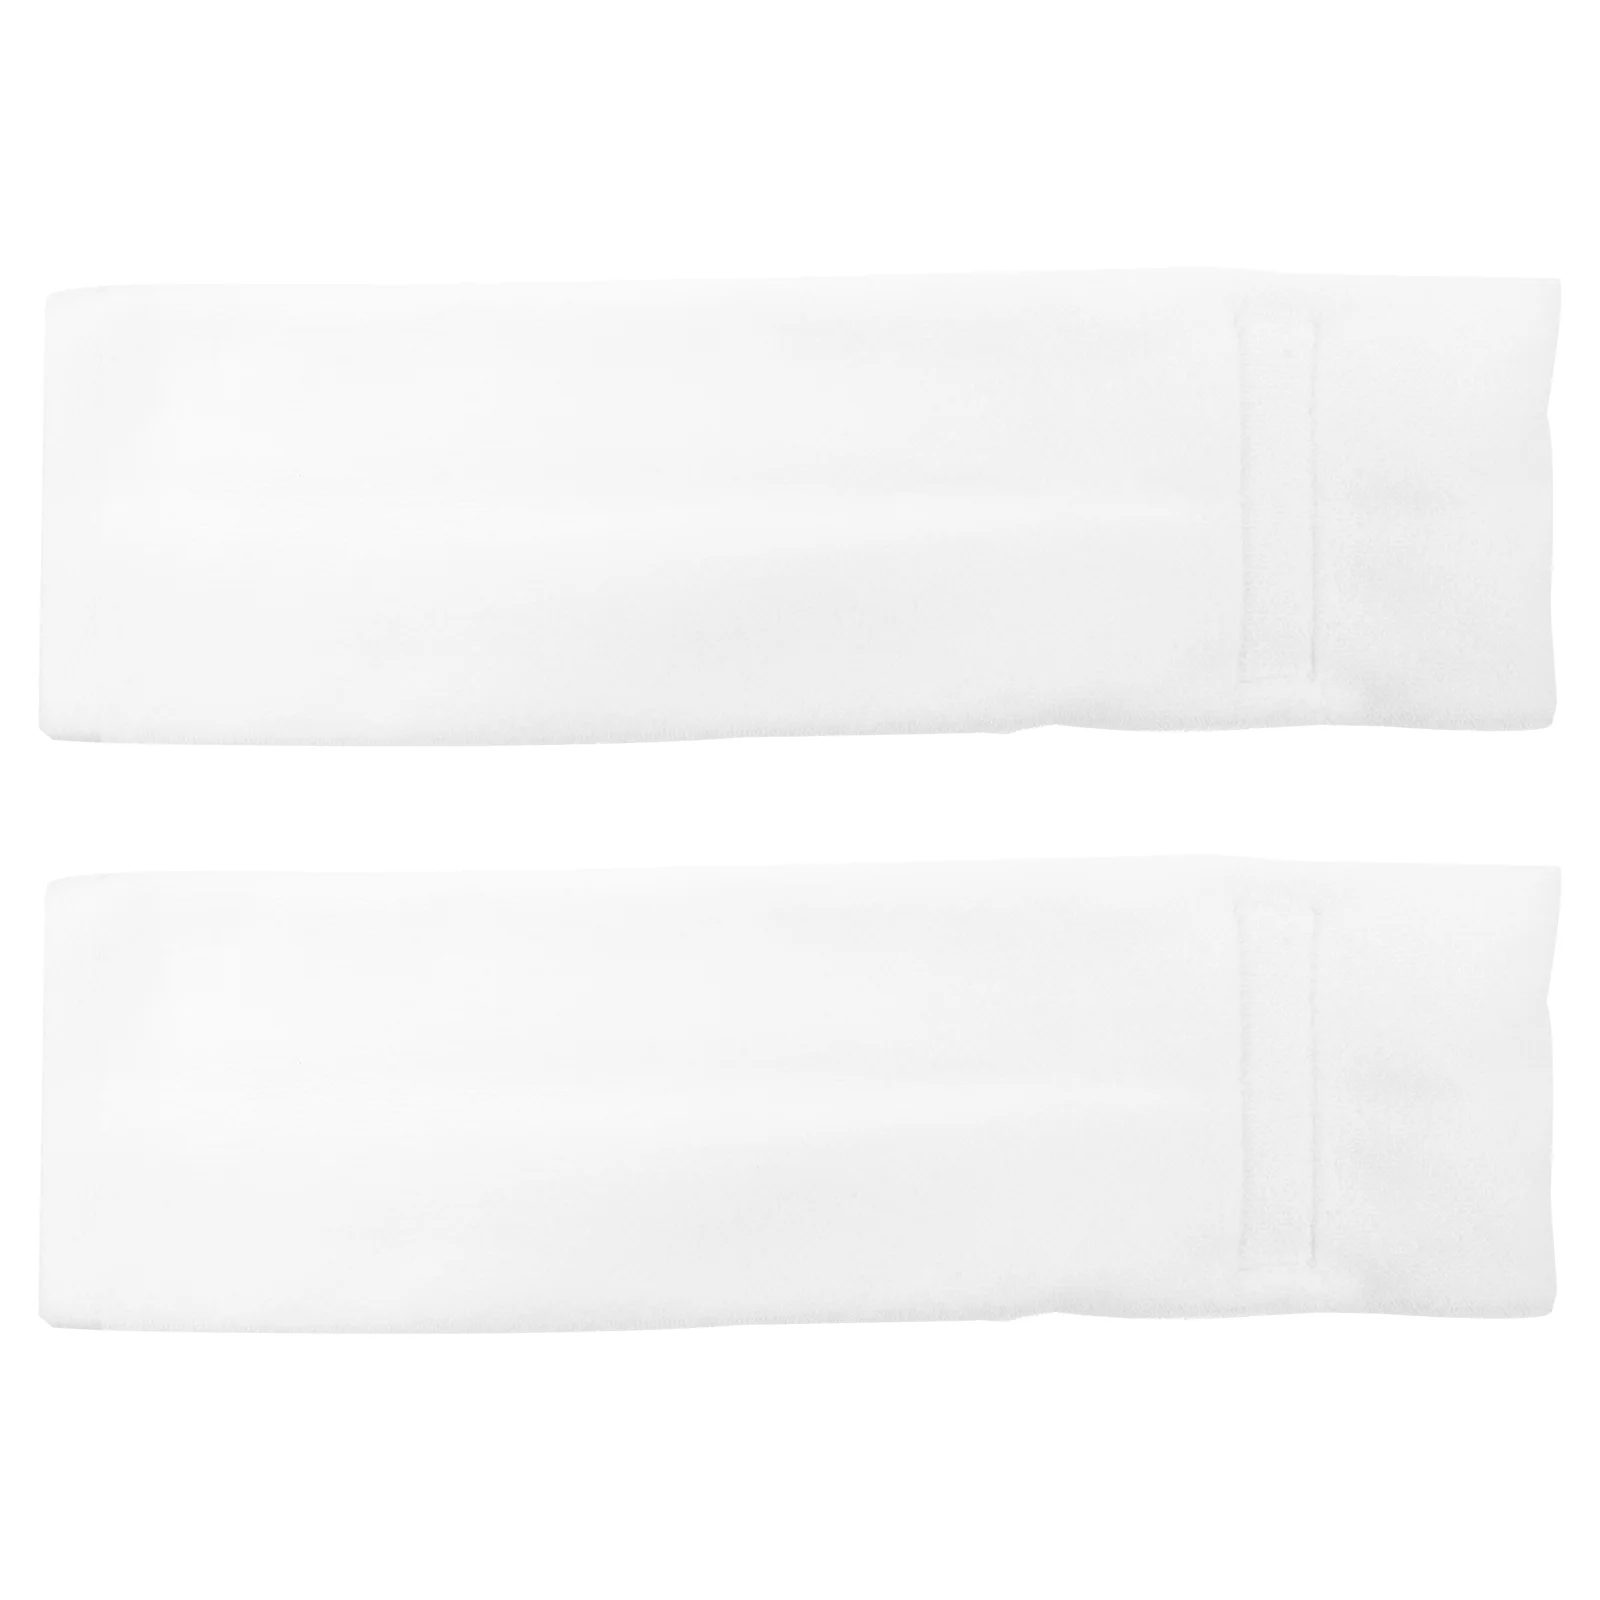 

2 Pcs White Washcloths Gym Towels Women Absorb Sweat Football Youth Fast Drying Bath Cotton Quick Travel Fitness